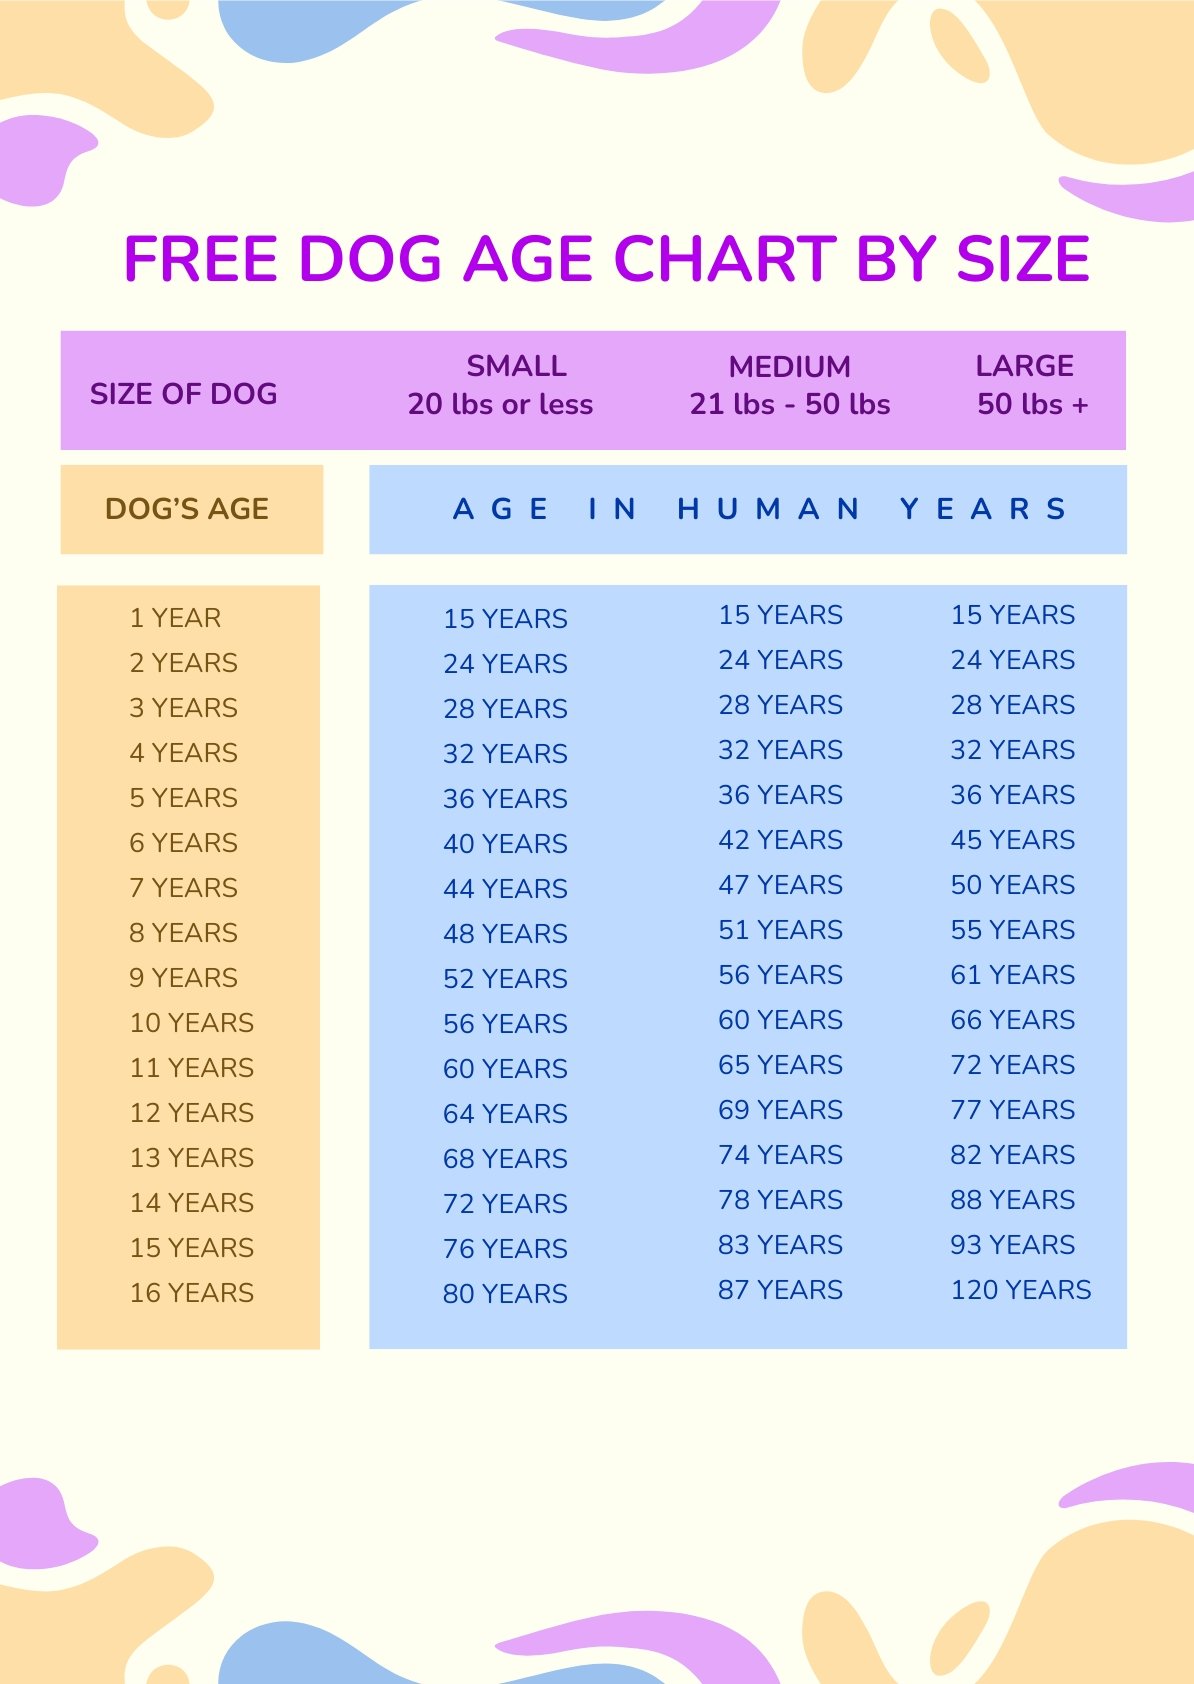 Dog Age Chart By Size in PSD - Download | Template.net